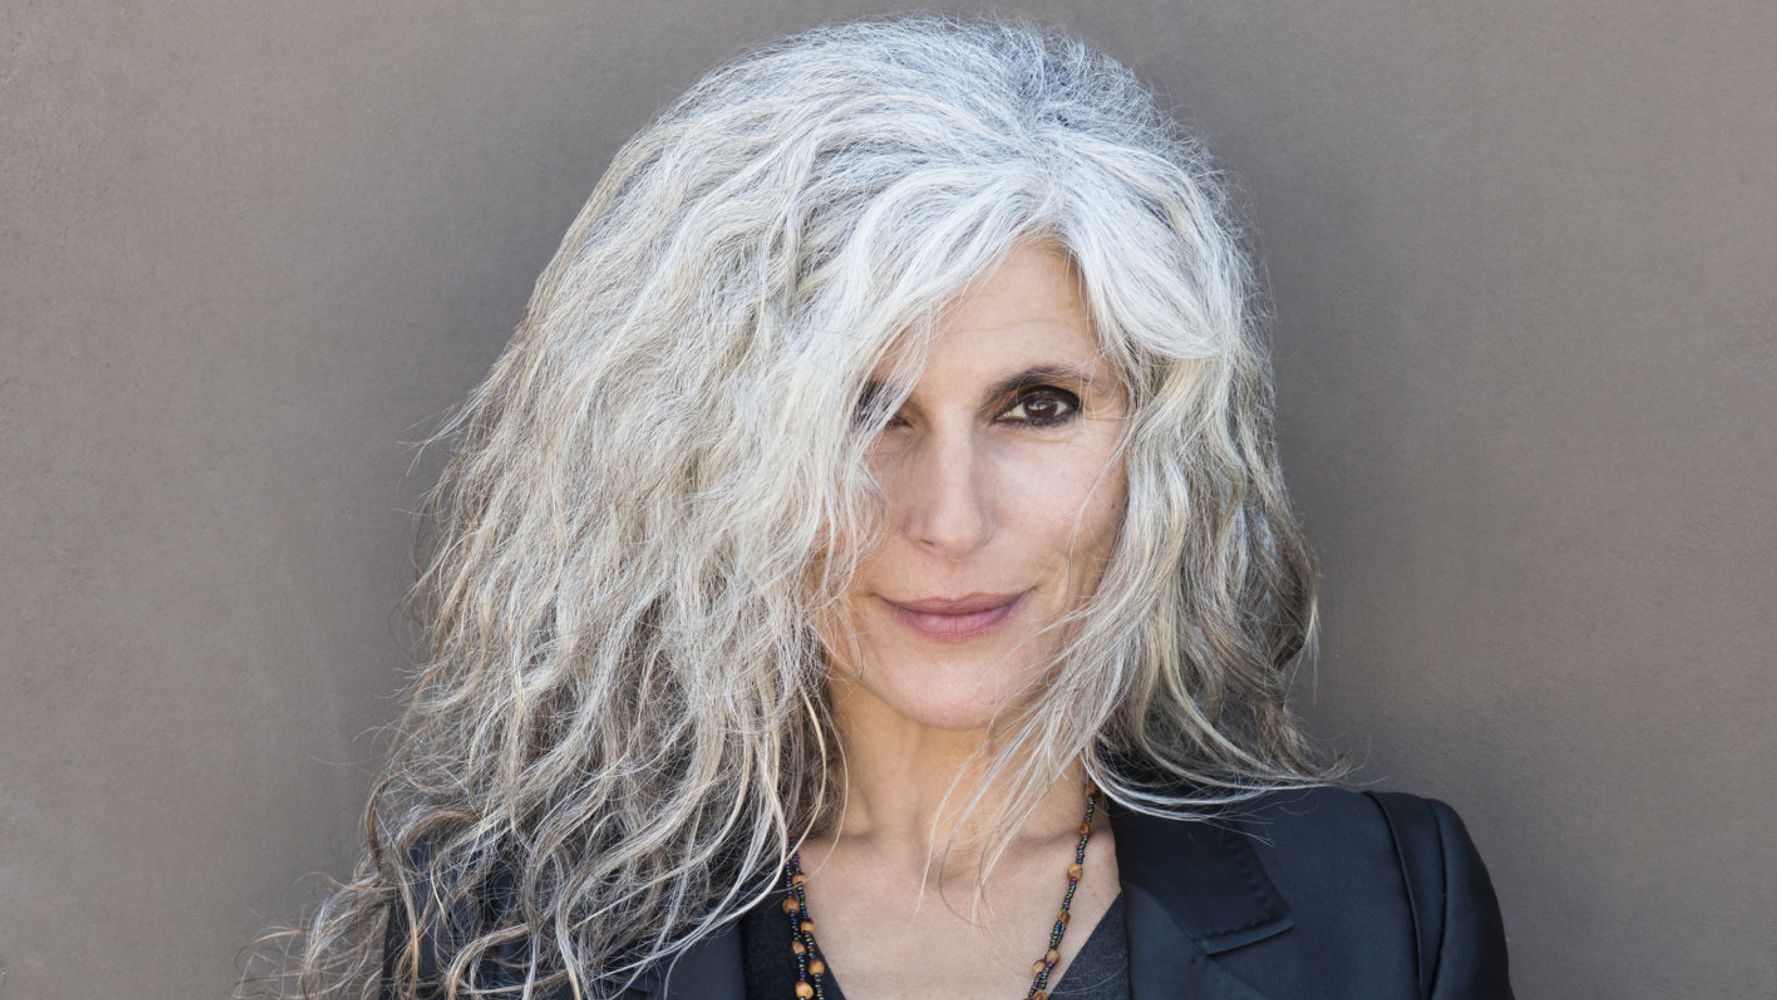 17 Hairstyles That Prove Going Gray (And White) Is Gorgeous | HuffPost Style